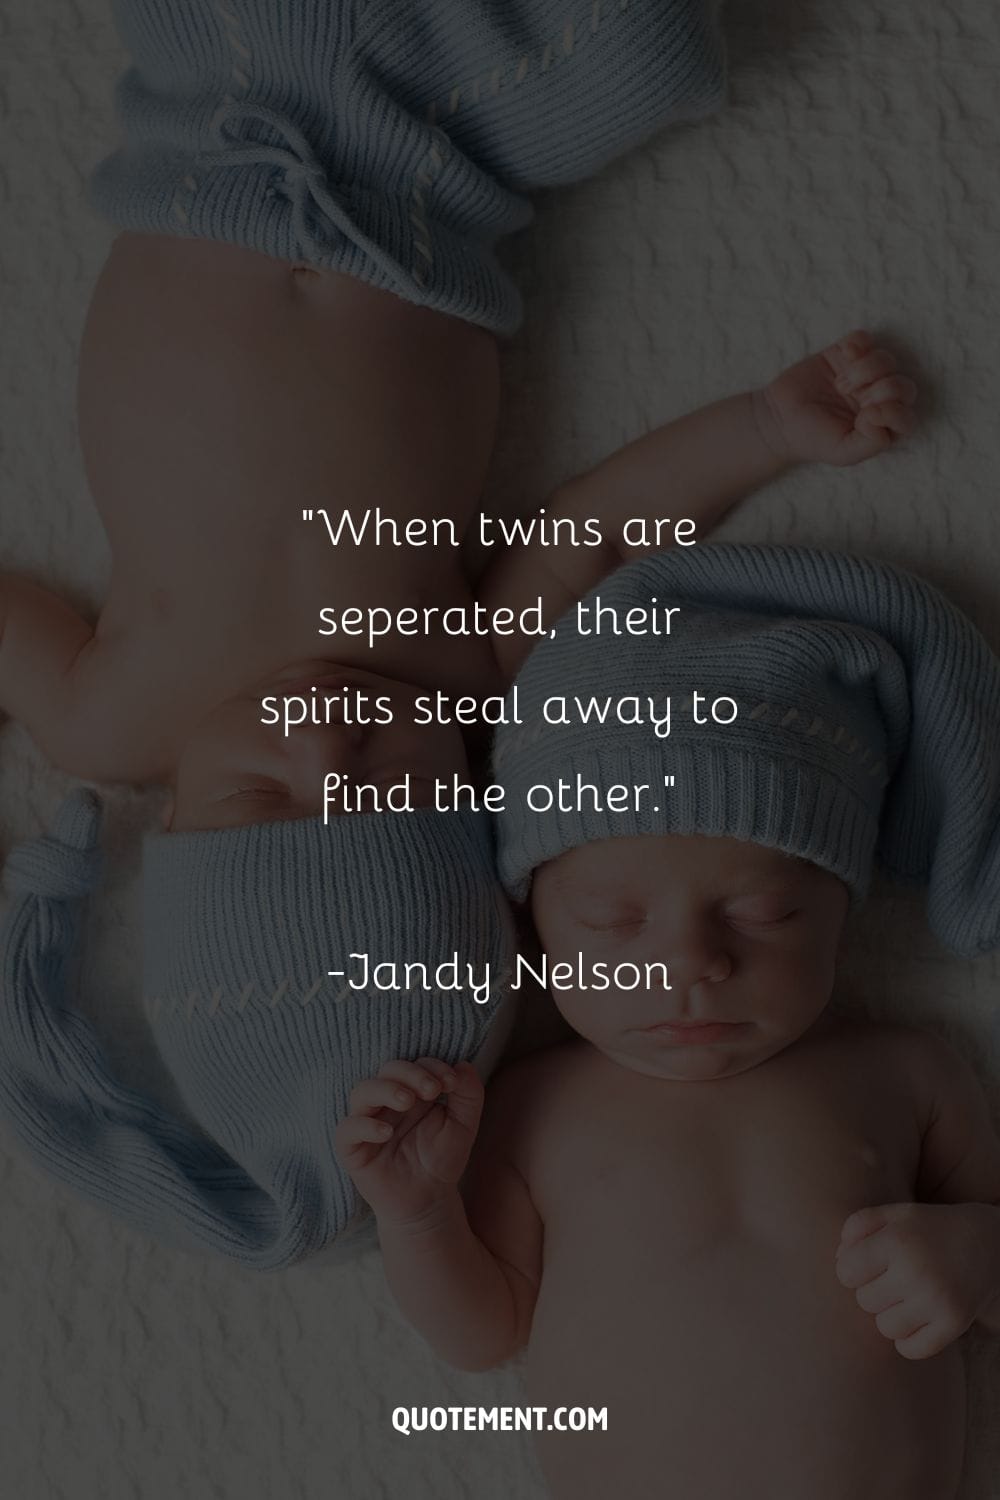 “When twins are seperated, their spirits steal away to find the other” ― Jandy Nelson, I'll Give You the Sun